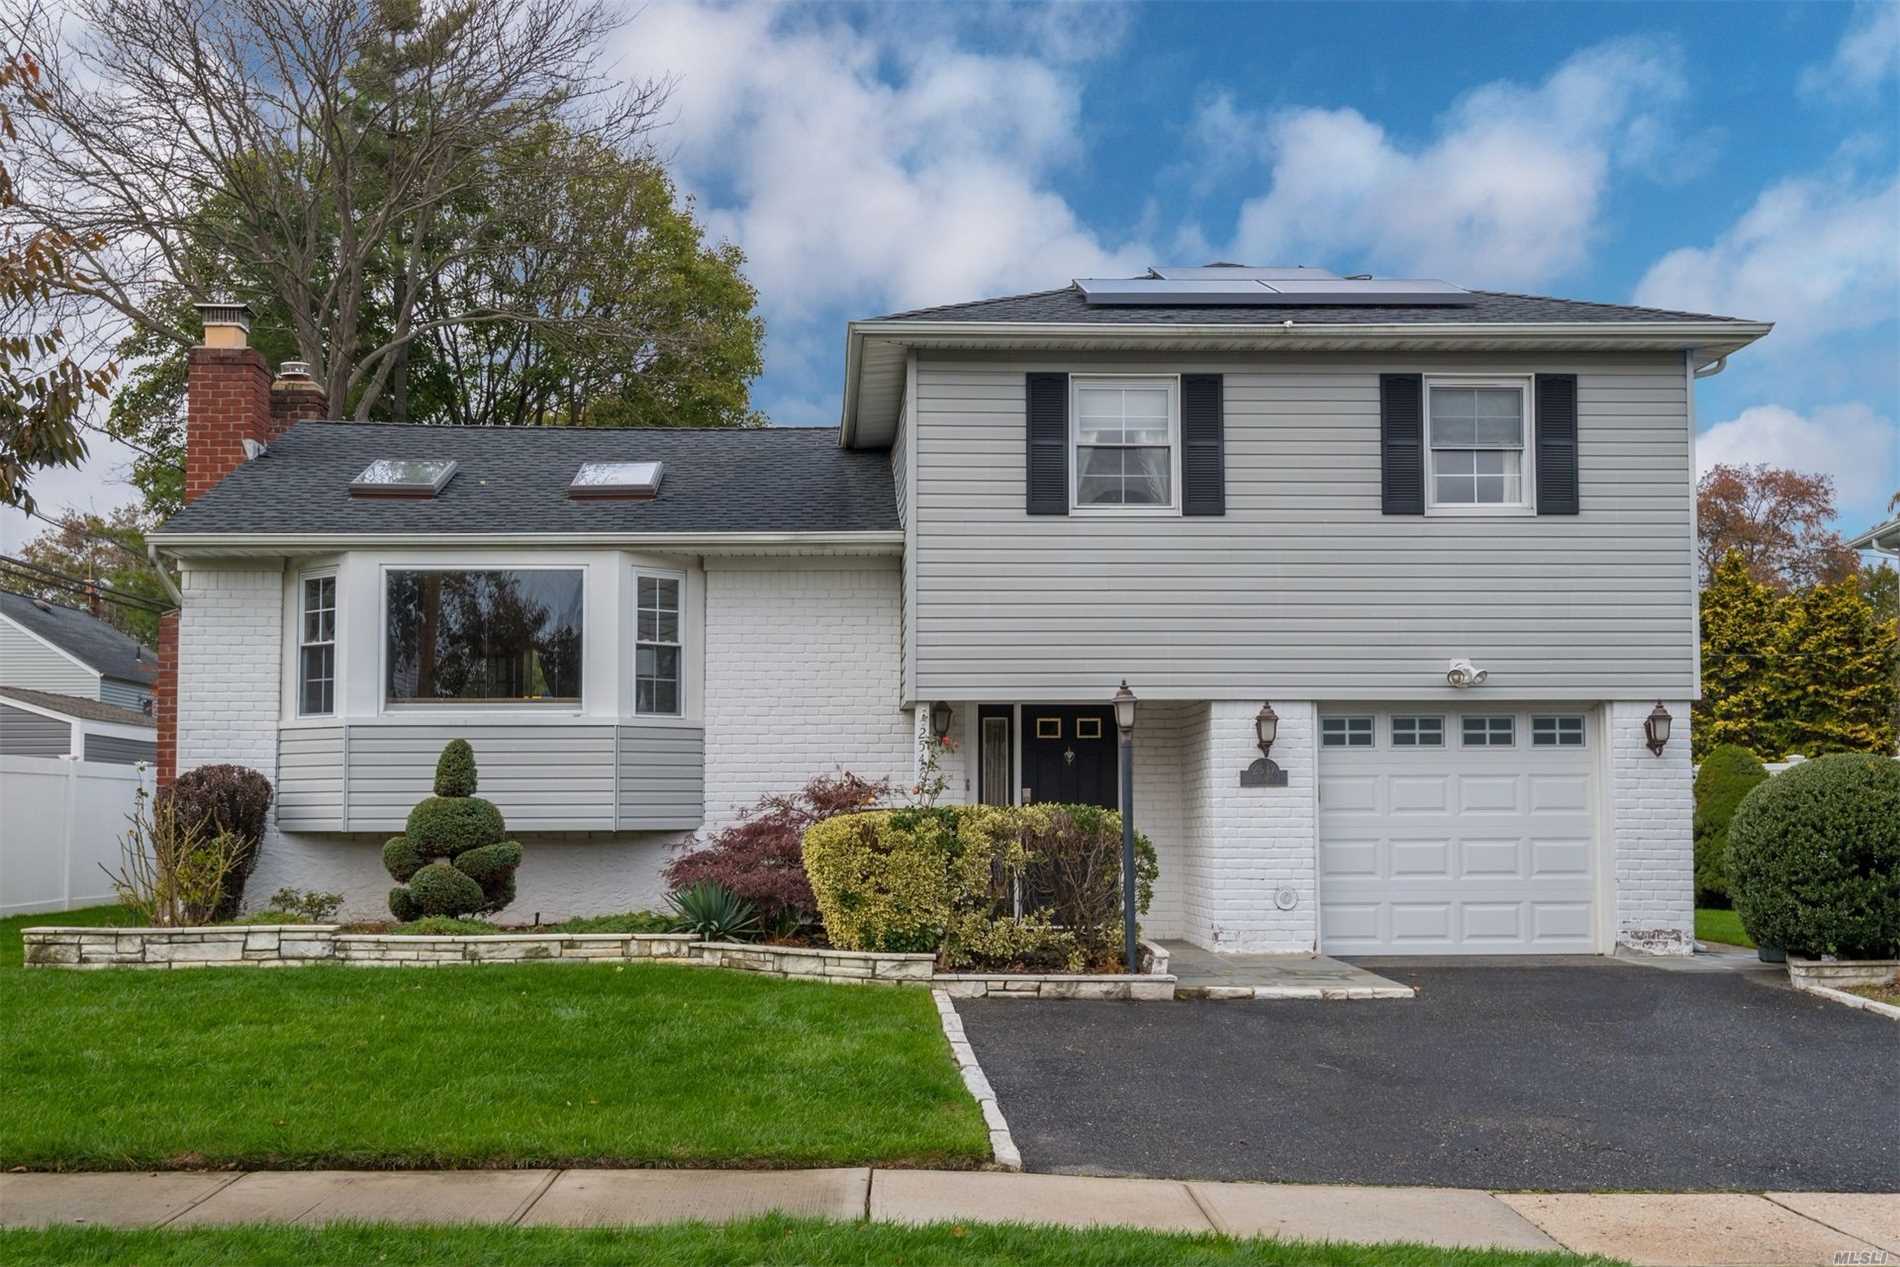 Beautiful, Updated/Exp Split -Perfect Move In Rdy Home W/3Skylights, Energy Eff: Solar Panels, Dishwasher, Mobile Controlled Thermos& Updated Windos & Roof. Eik W/Ss Appliances, Bfast Bar, Vented Hood For Cooking, Induction Stove Top, Microwave/Convection Oven. Part Fin Bsmnt, Exp. Fmly Rm& Open Concept Den/Dr. Vaulted Ceilings, Slider To Outdoor Deck/Patio In Large Yard.